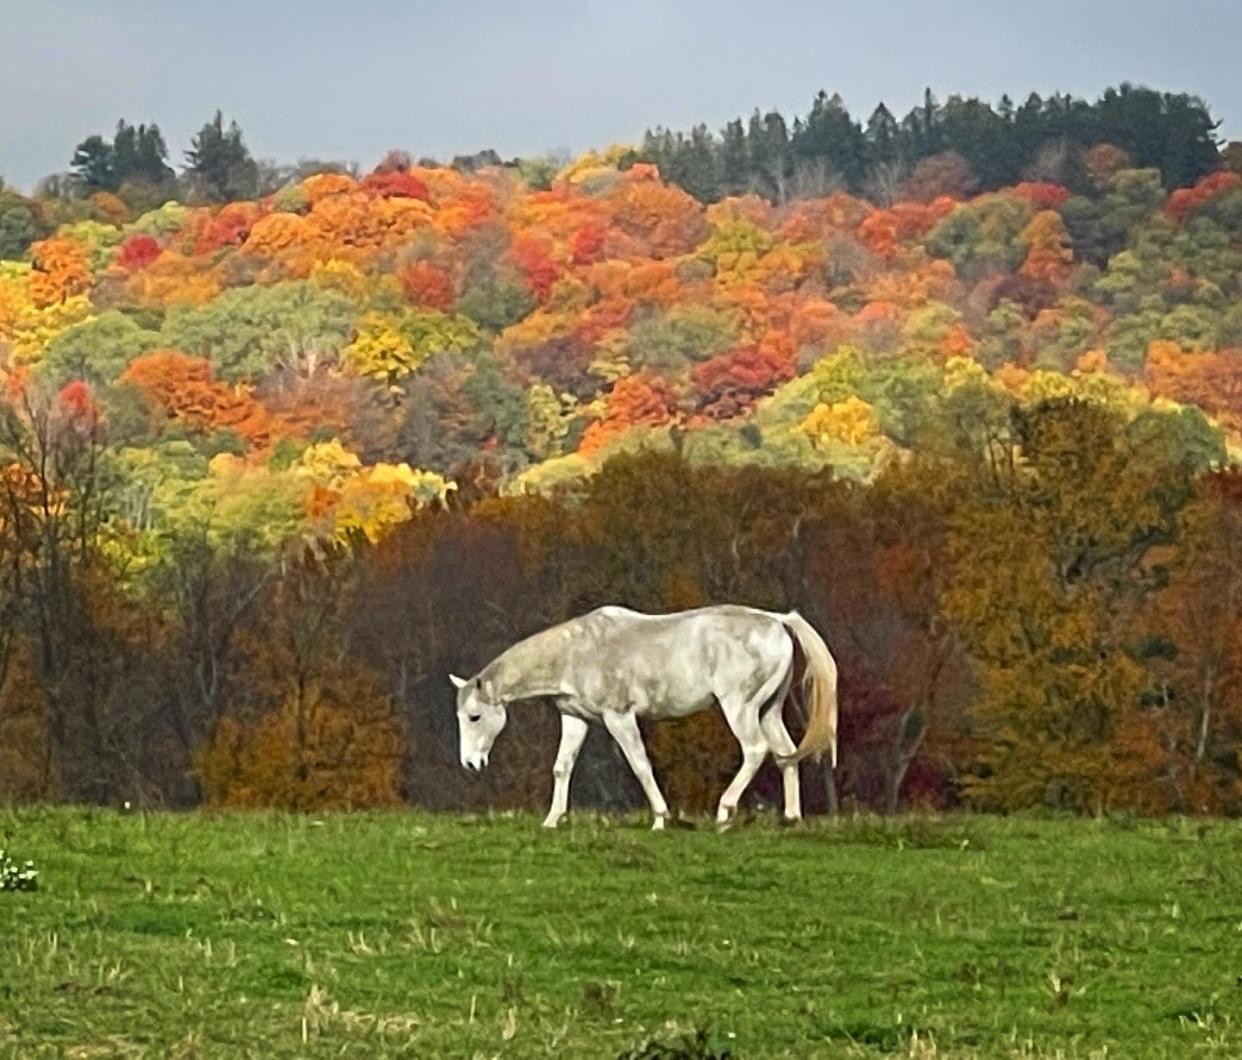 Horses are prominent state symbols for six states, among others.